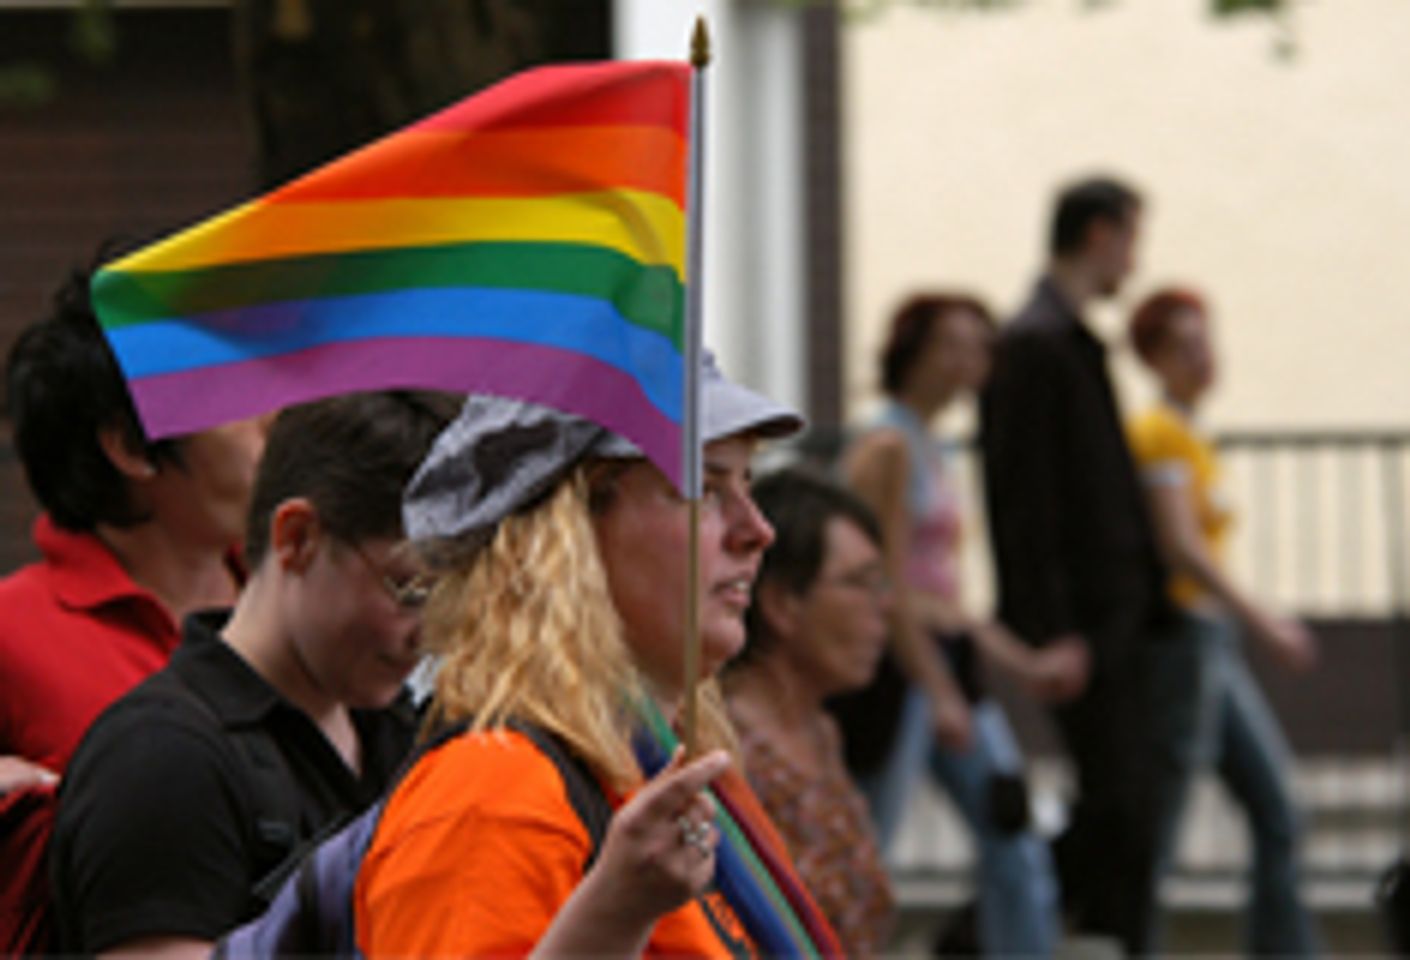 Nationwide Prop 8 Protest Scheduled for Nov. 15